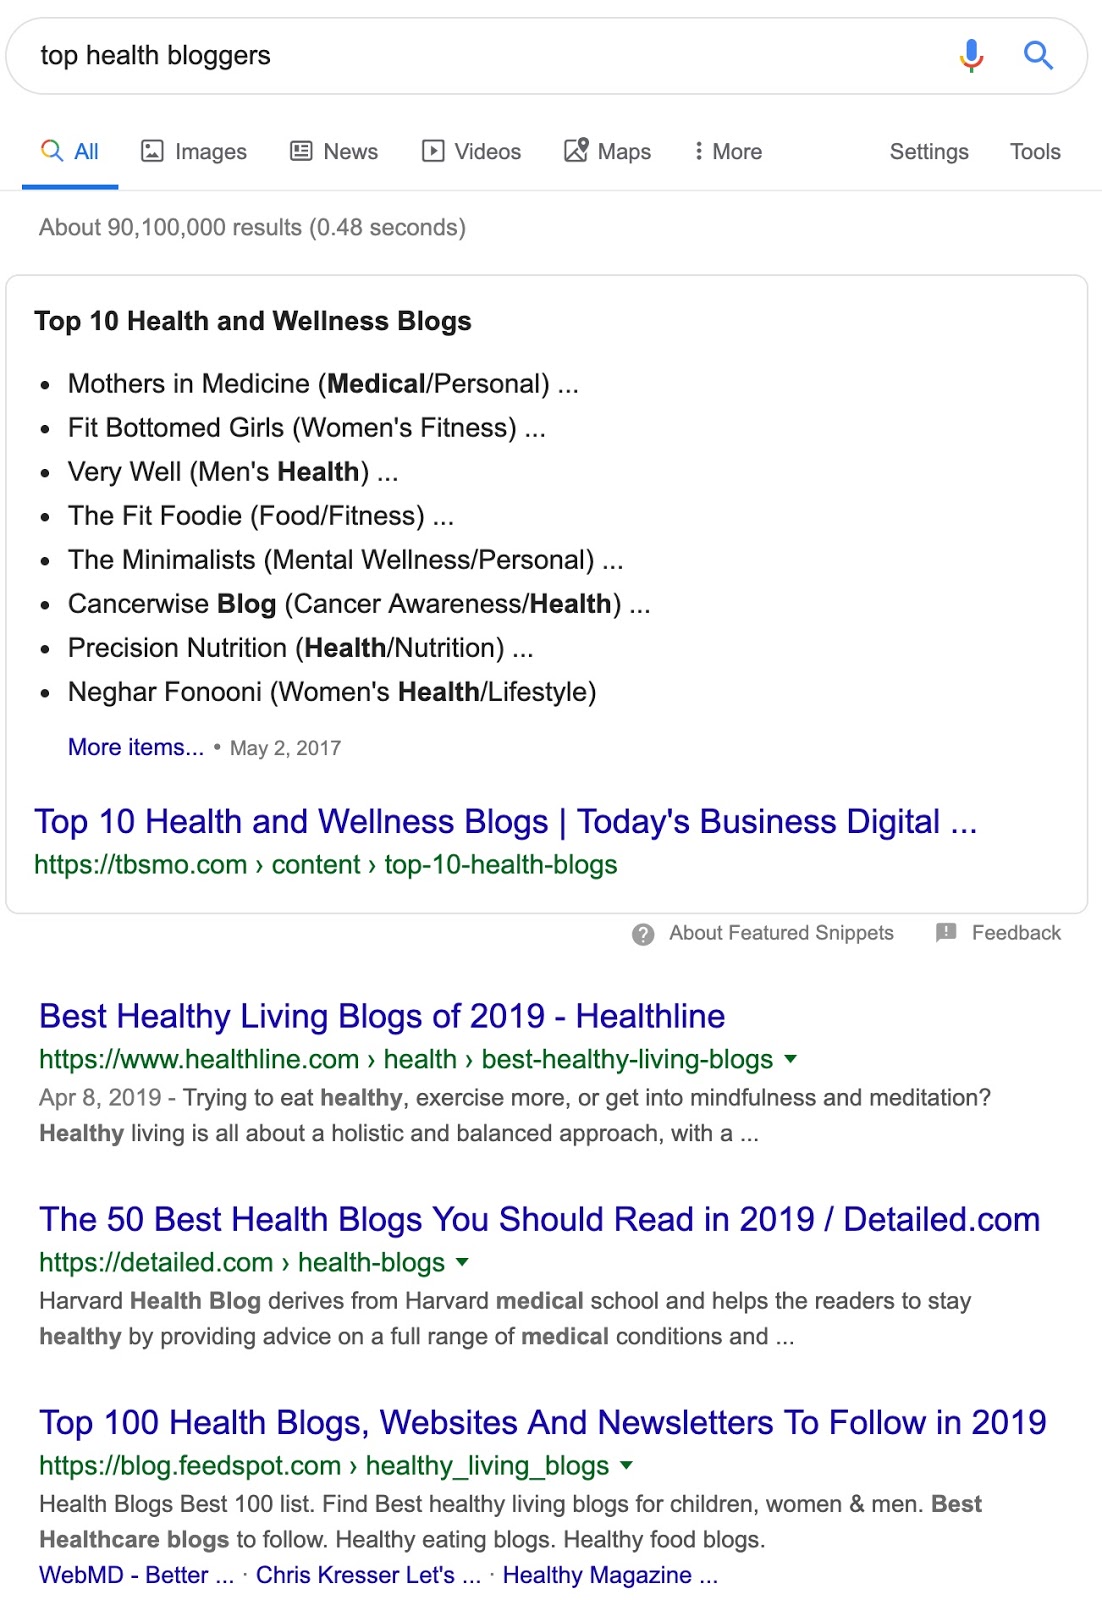 top health bloggers Google Search